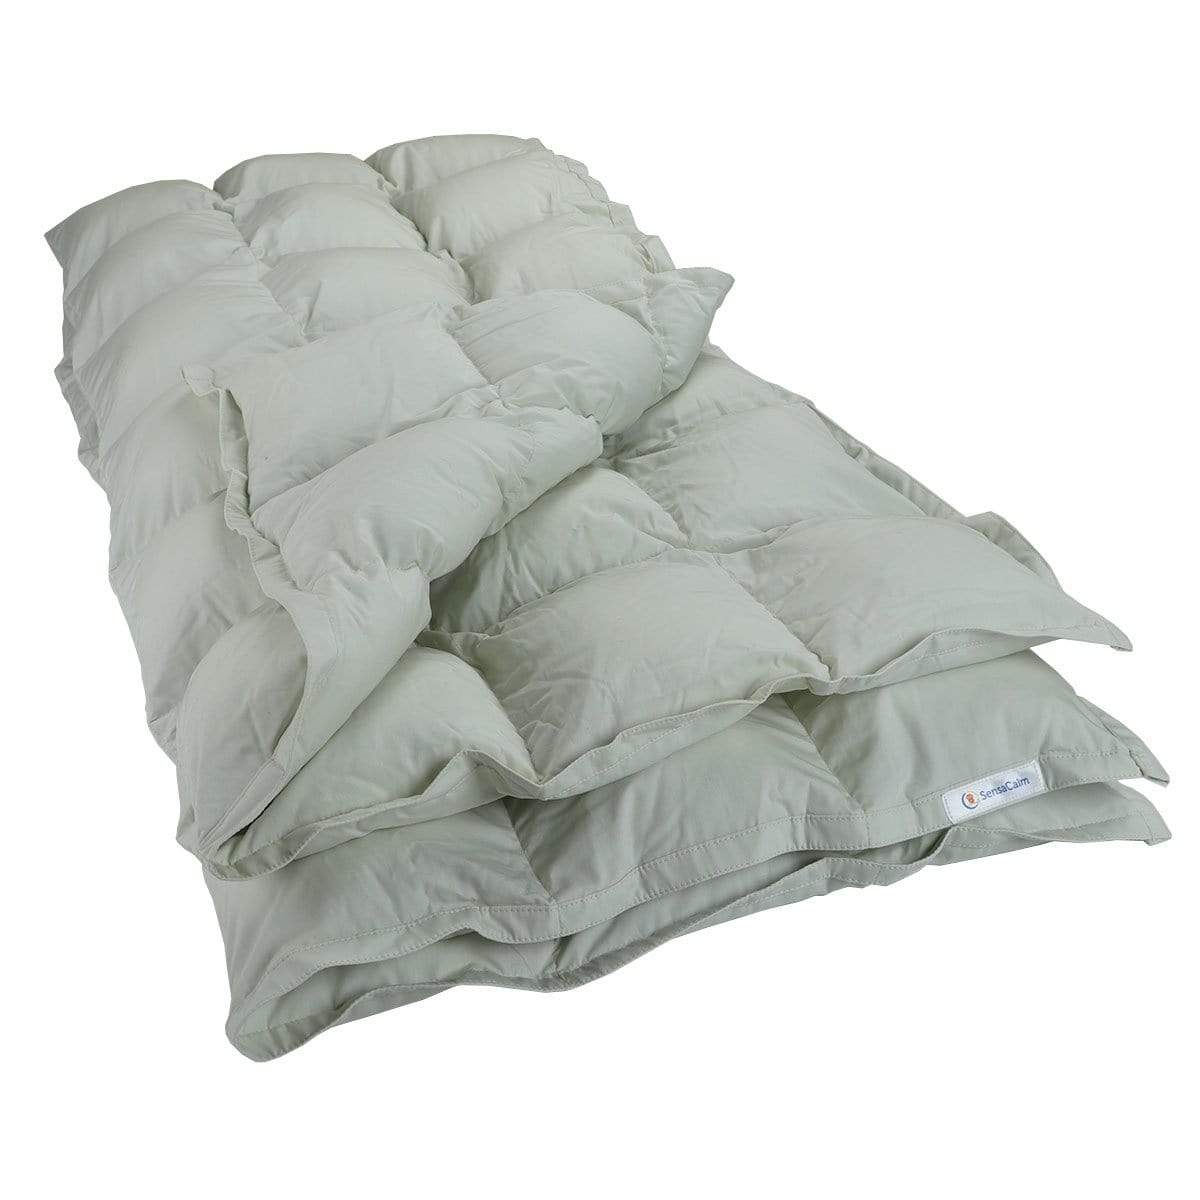 Weighted Blanket - Off White